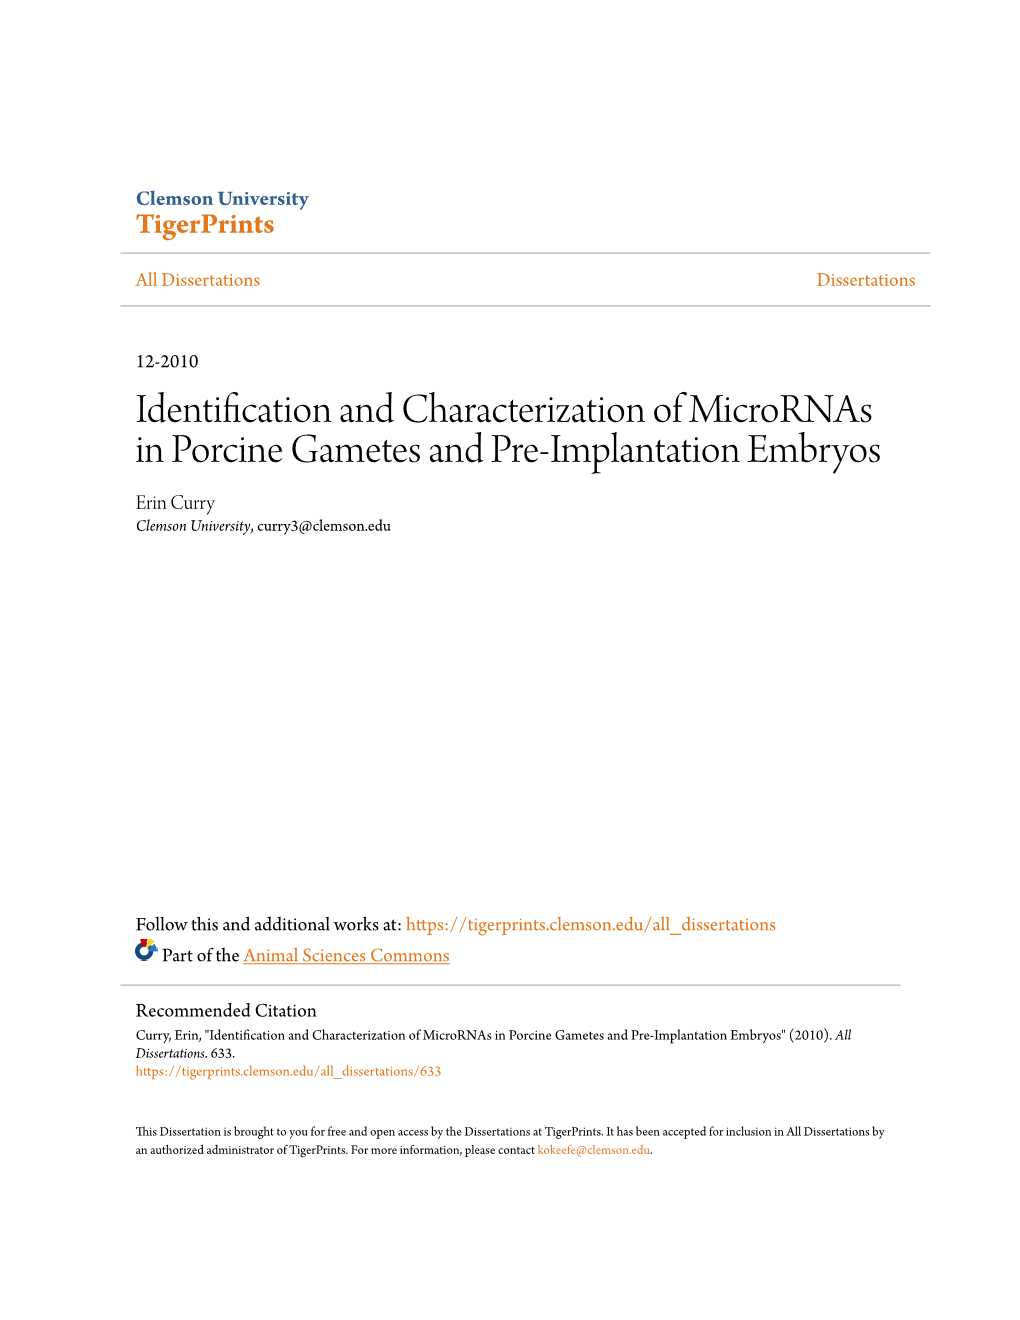 Identification and Characterization of Micrornas in Porcine Gametes and Pre-Implantation Embryos Erin Curry Clemson University, Curry3@Clemson.Edu